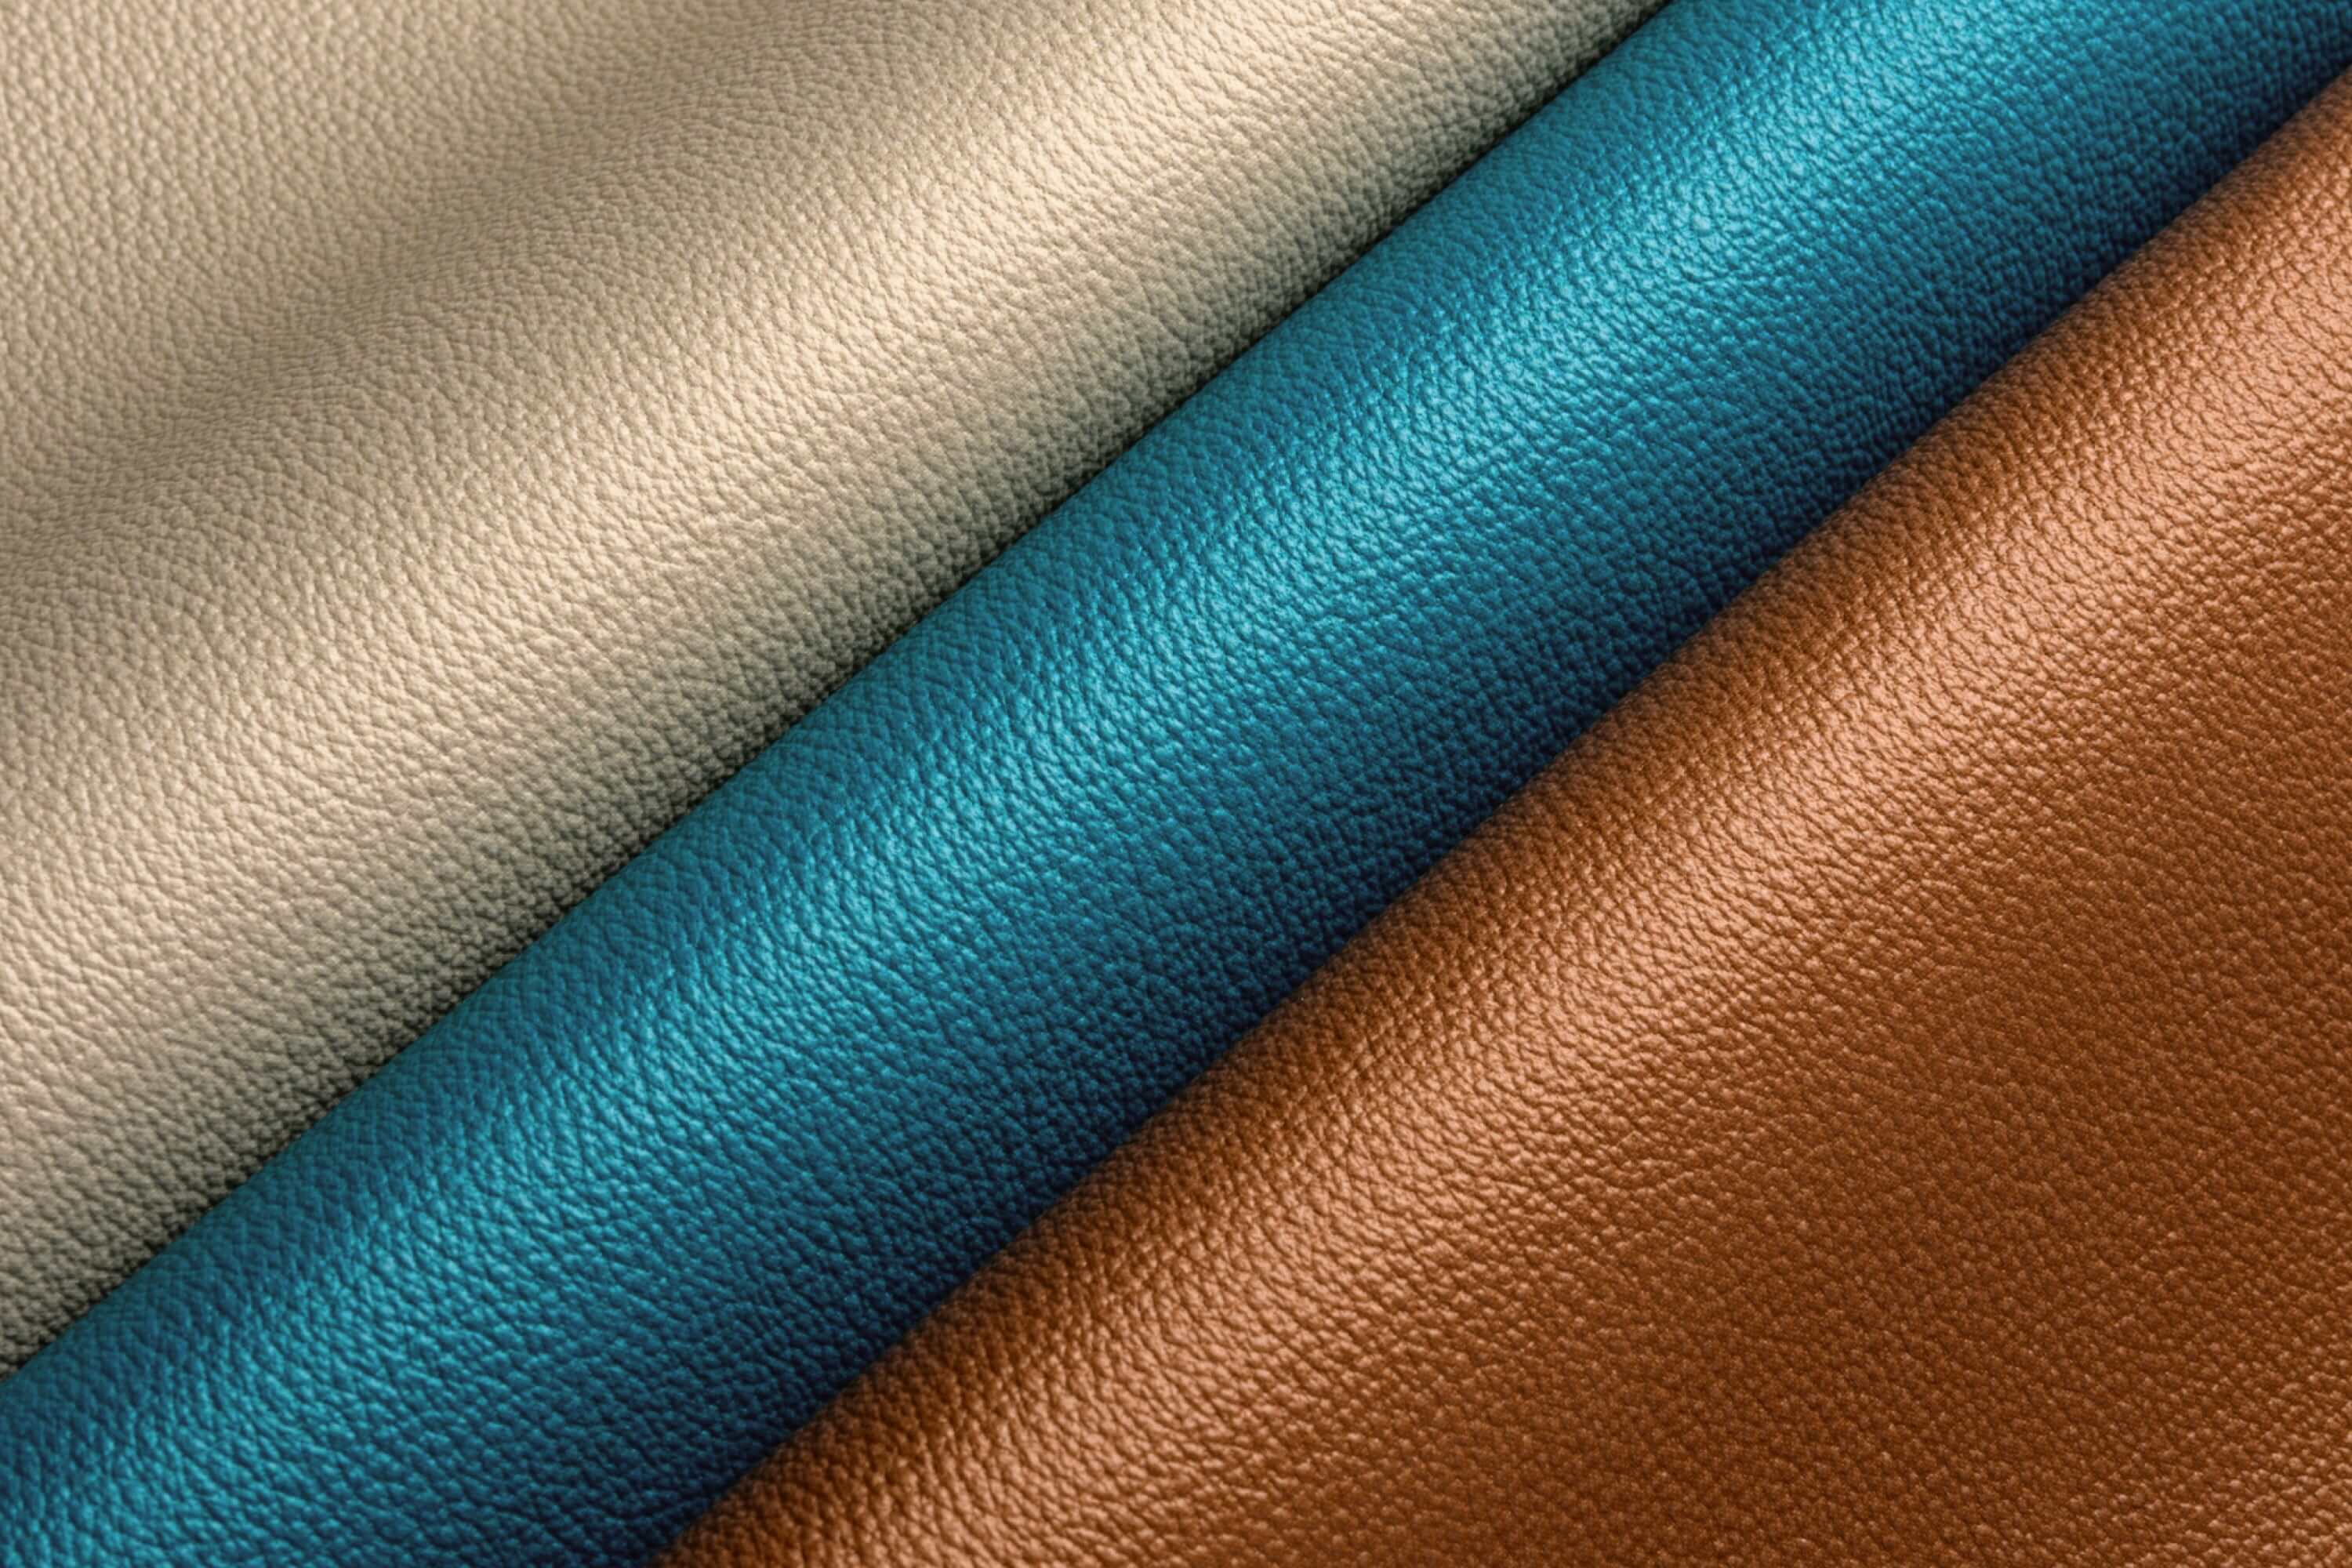 QUARTECH – Earth-friendly, leather-like textile material